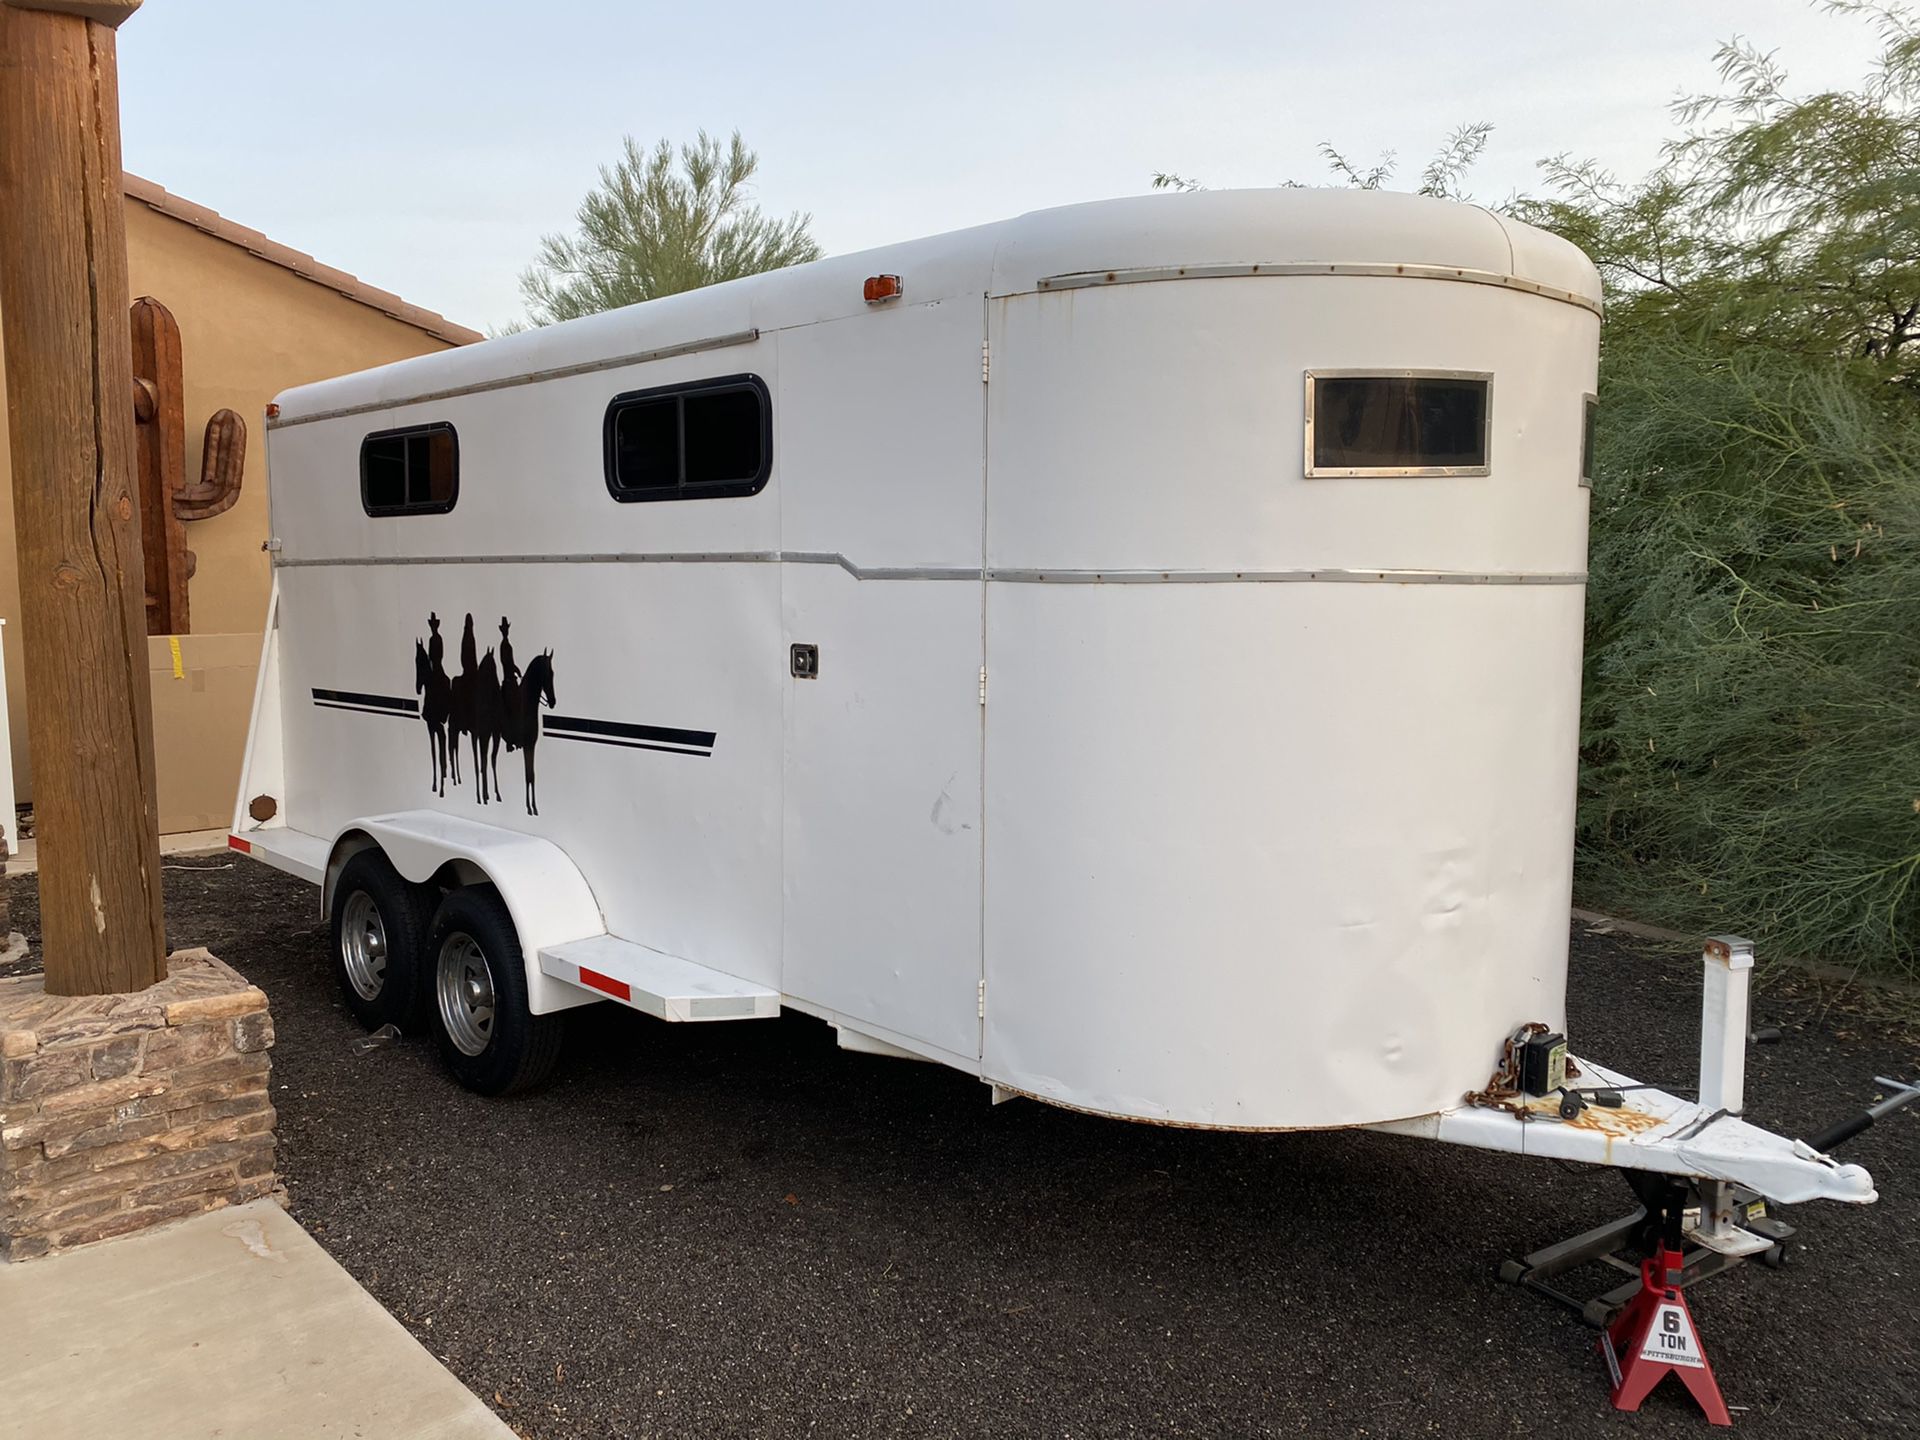 4 horse slant enclosed trailer with tack room. Brand new tires. Saddle and tack available.